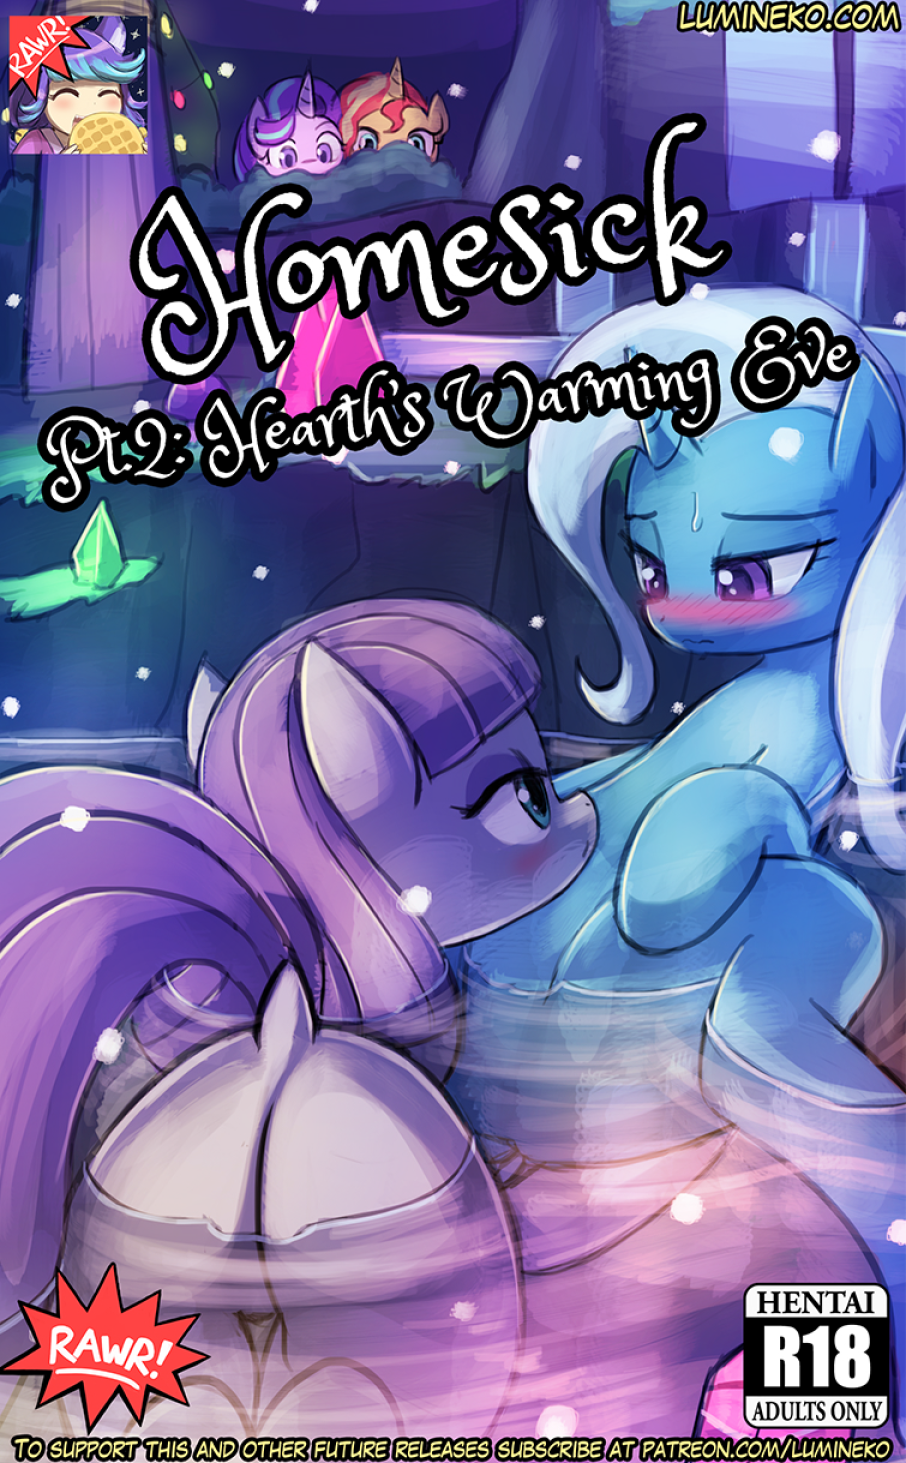 Homesick Part 2: Hearth’s Warming Eve